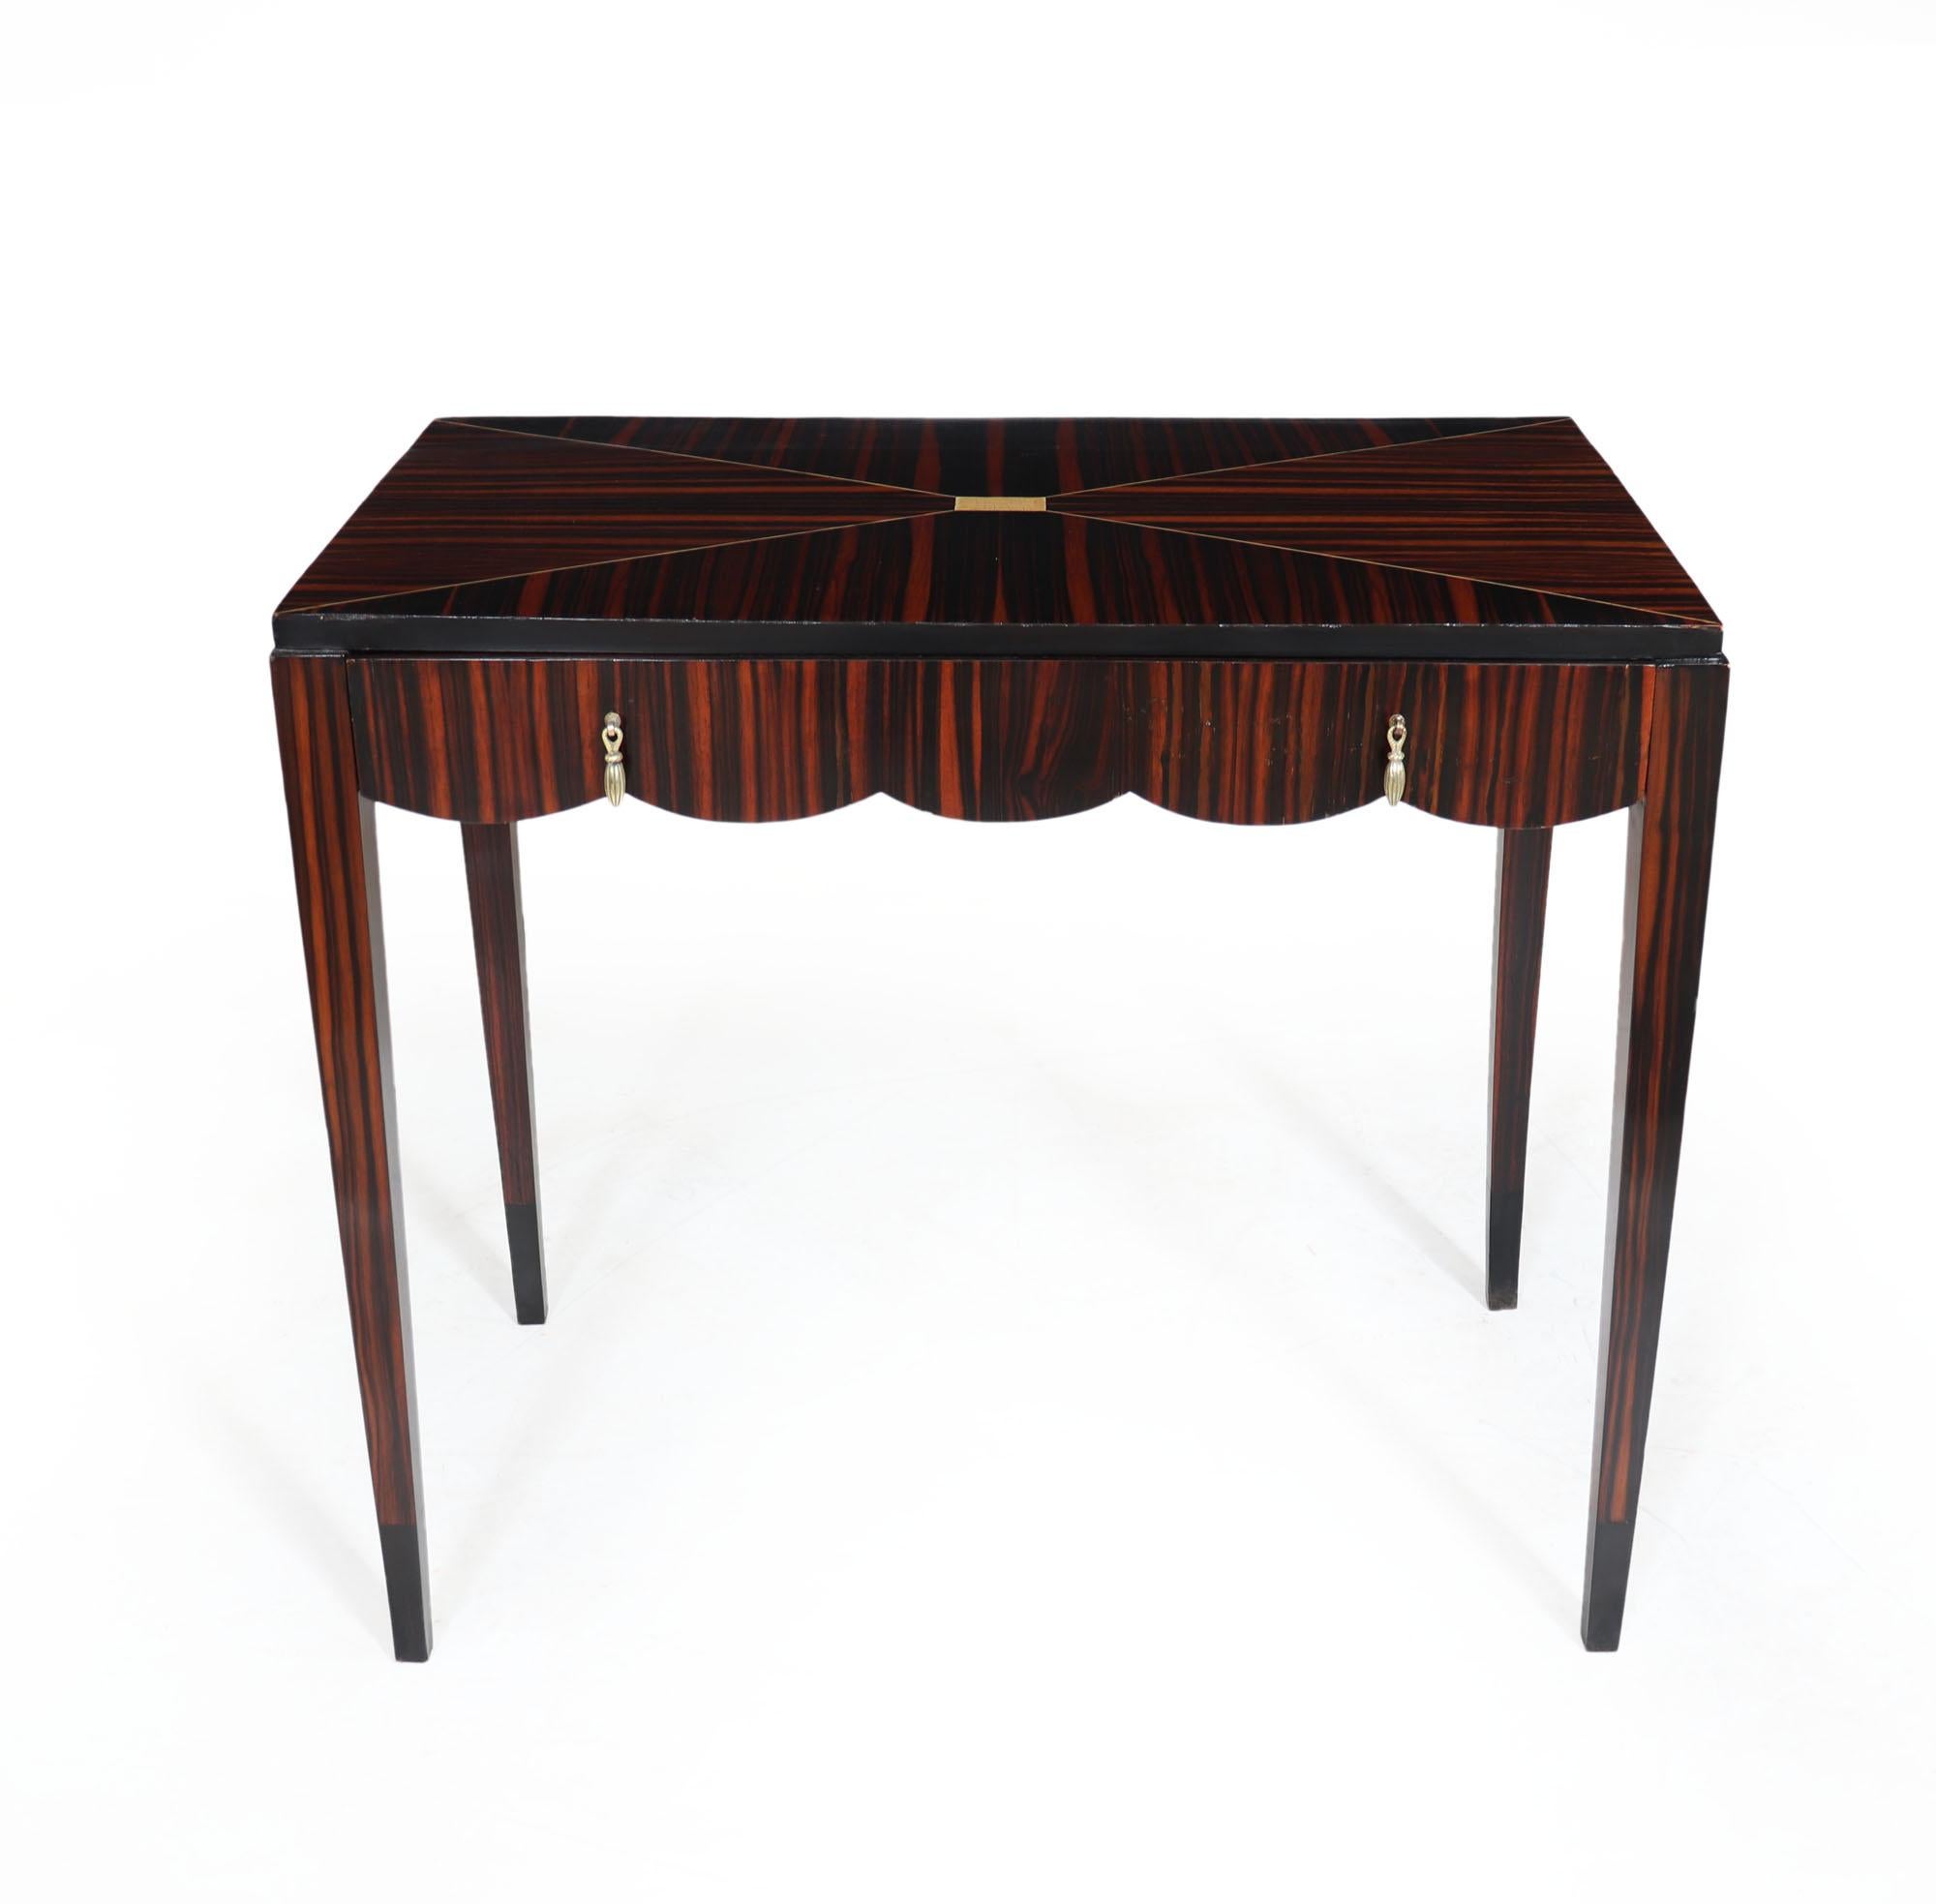 A French Art Deco single drawer side table produced in Macassar ebony with solid tipped feet the table is in great condition and has been restored and fully polished

Age: 1925

Style: French Art Deco

Origin : France

Material: Macassar